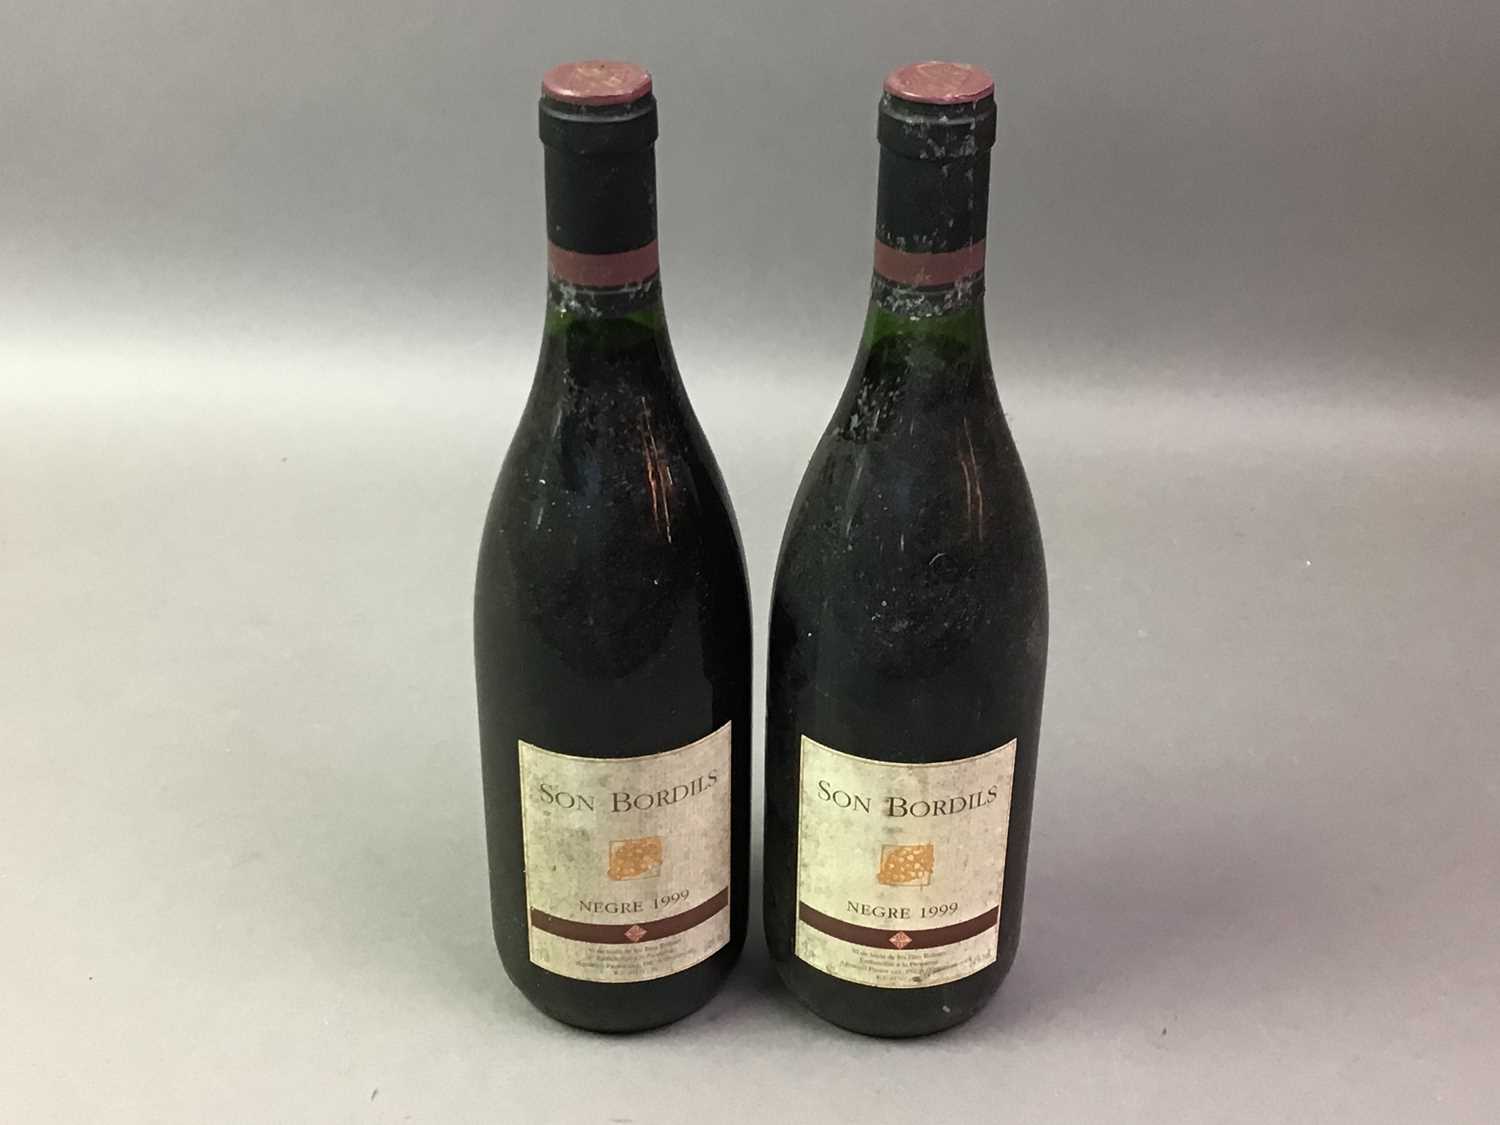 8 BOTTLES OF SON BORDILS 1999 NEGRE RED WINE - Image 3 of 3